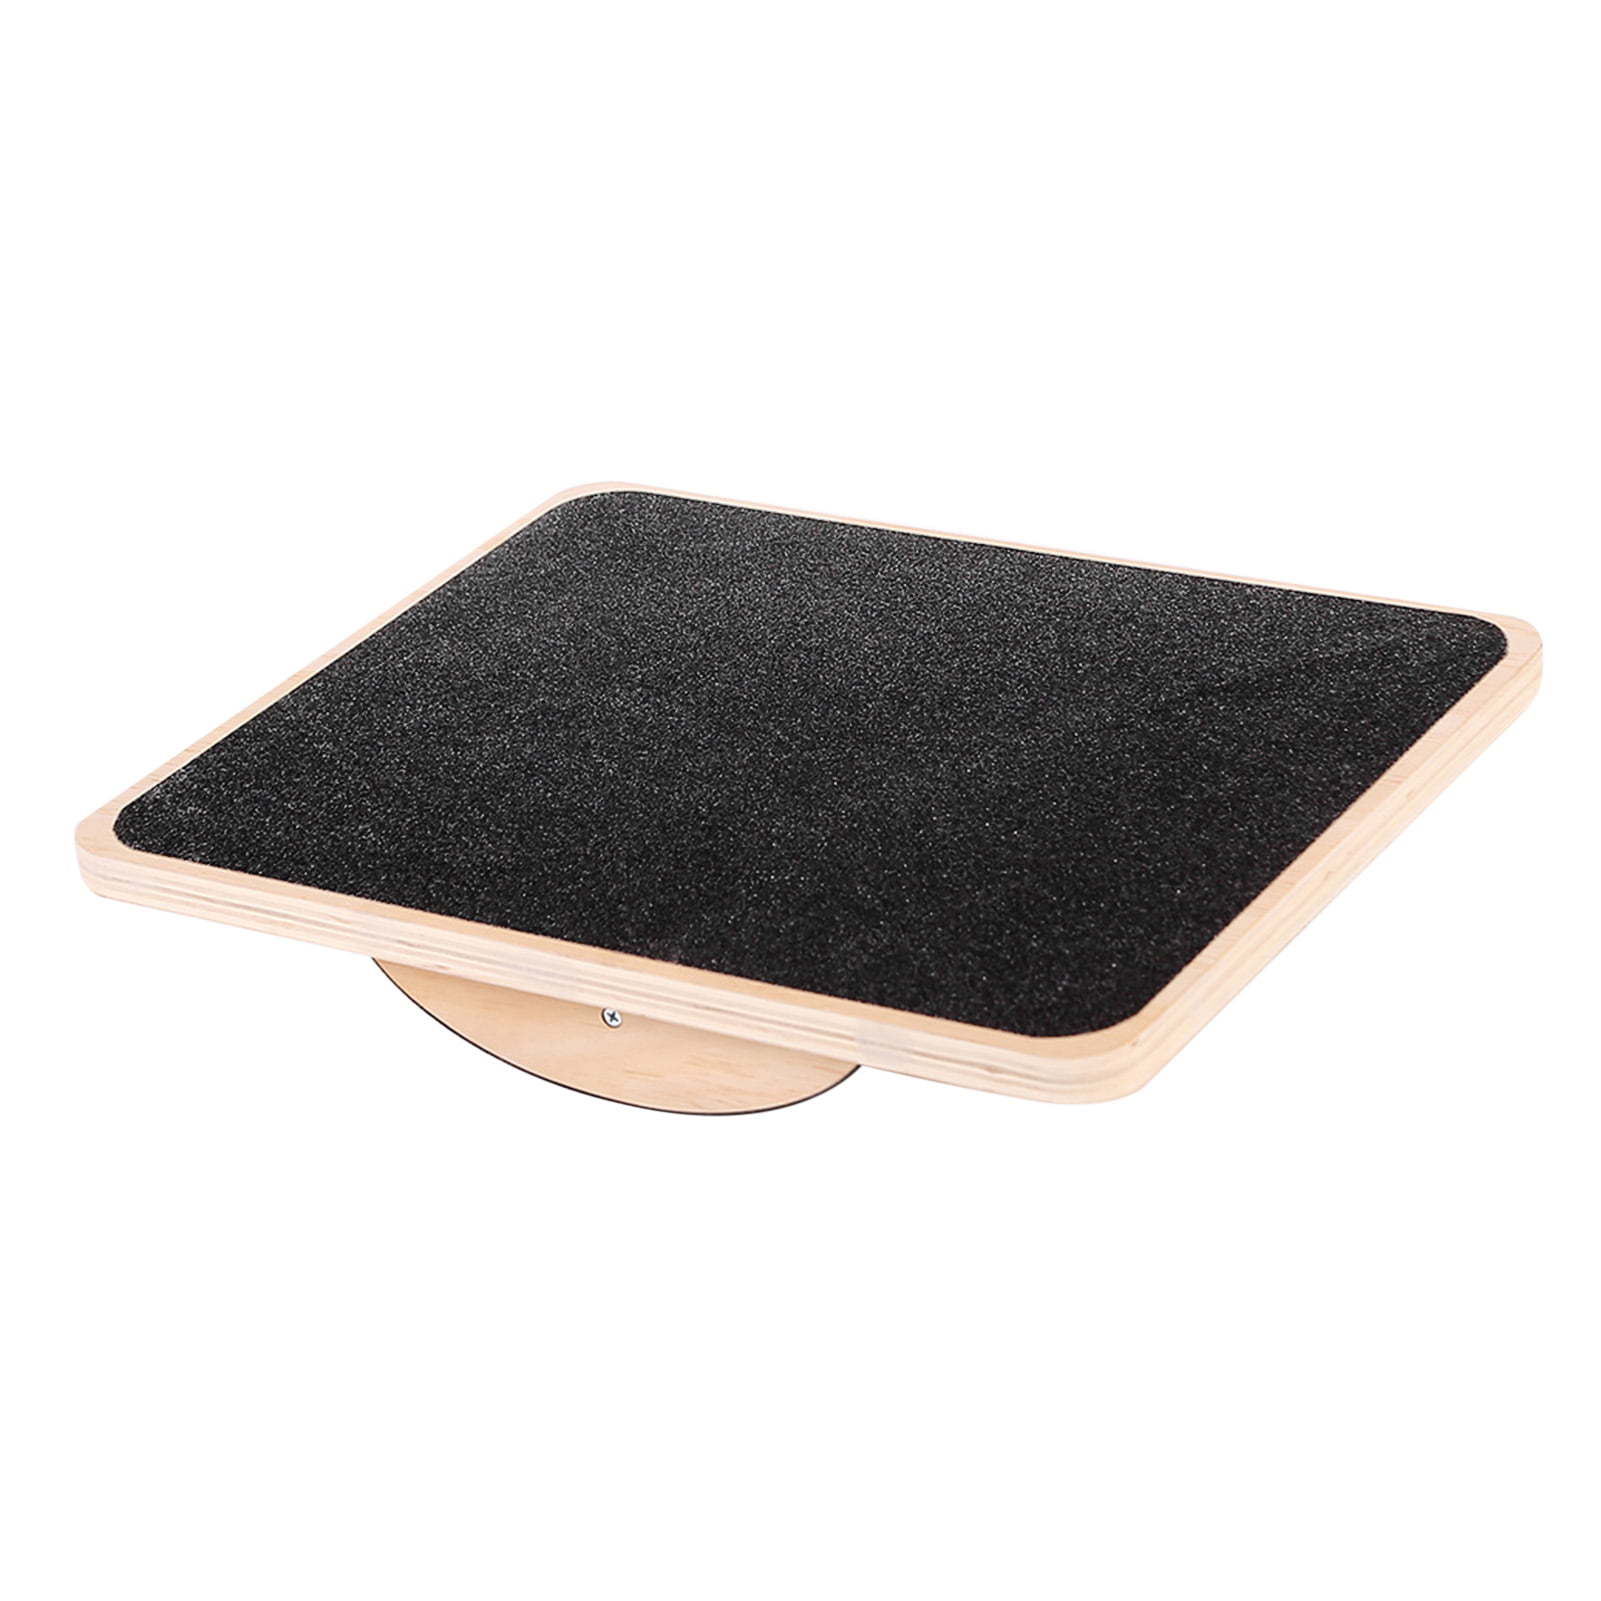 Wooden Balance Board Professional Wooden Balance Board Balancing Board For Under Desk Kids And Adults